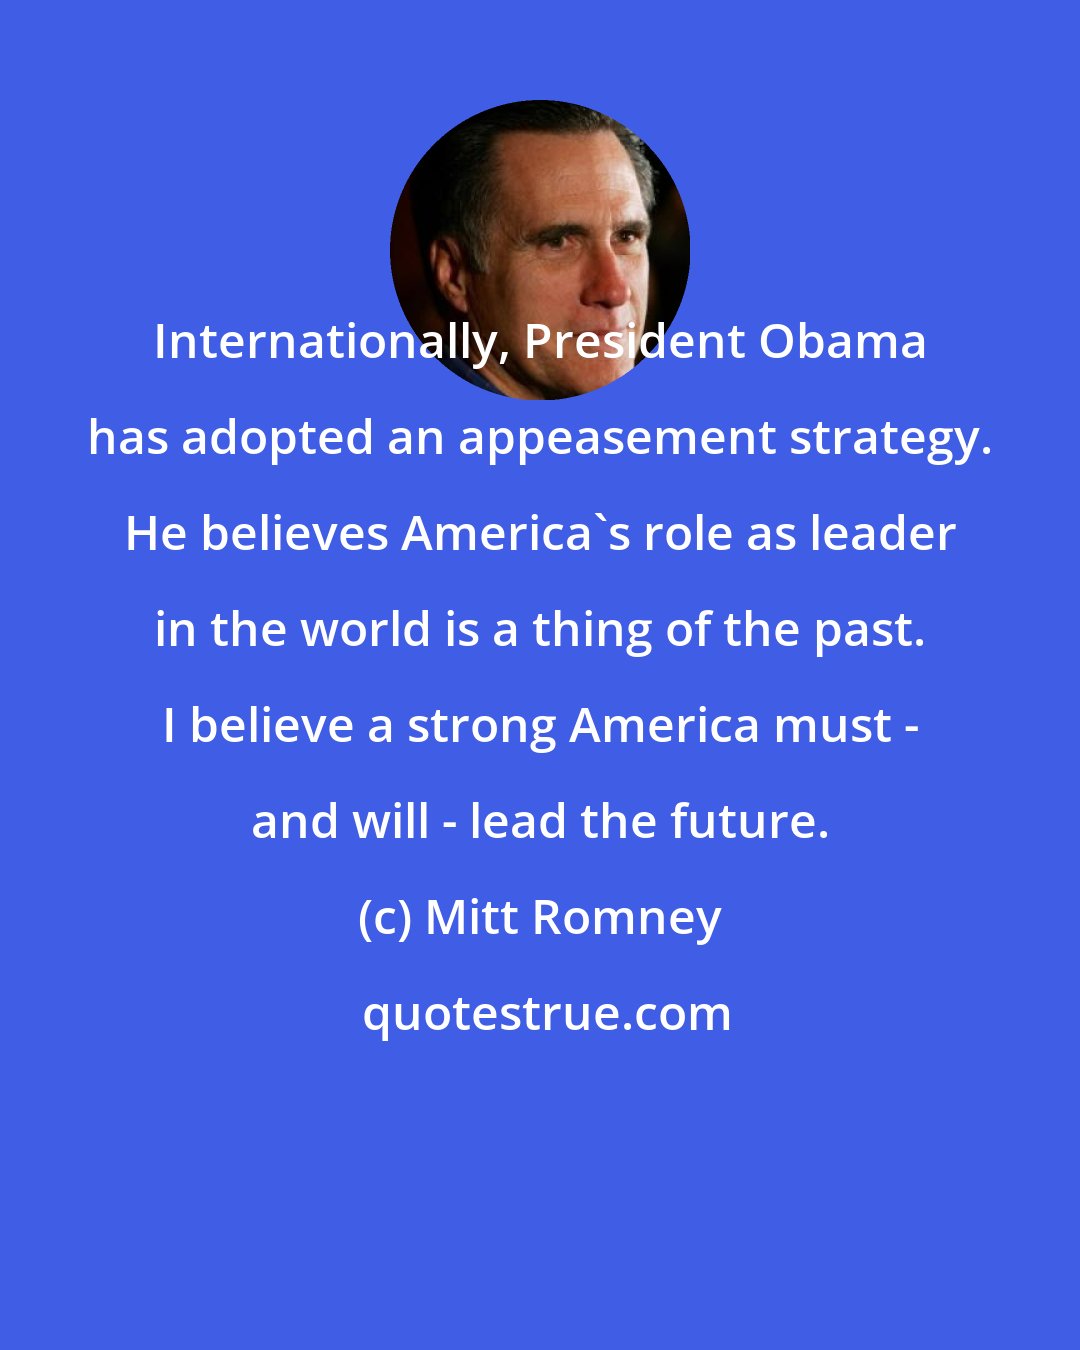 Mitt Romney: Internationally, President Obama has adopted an appeasement strategy. He believes America's role as leader in the world is a thing of the past. I believe a strong America must - and will - lead the future.